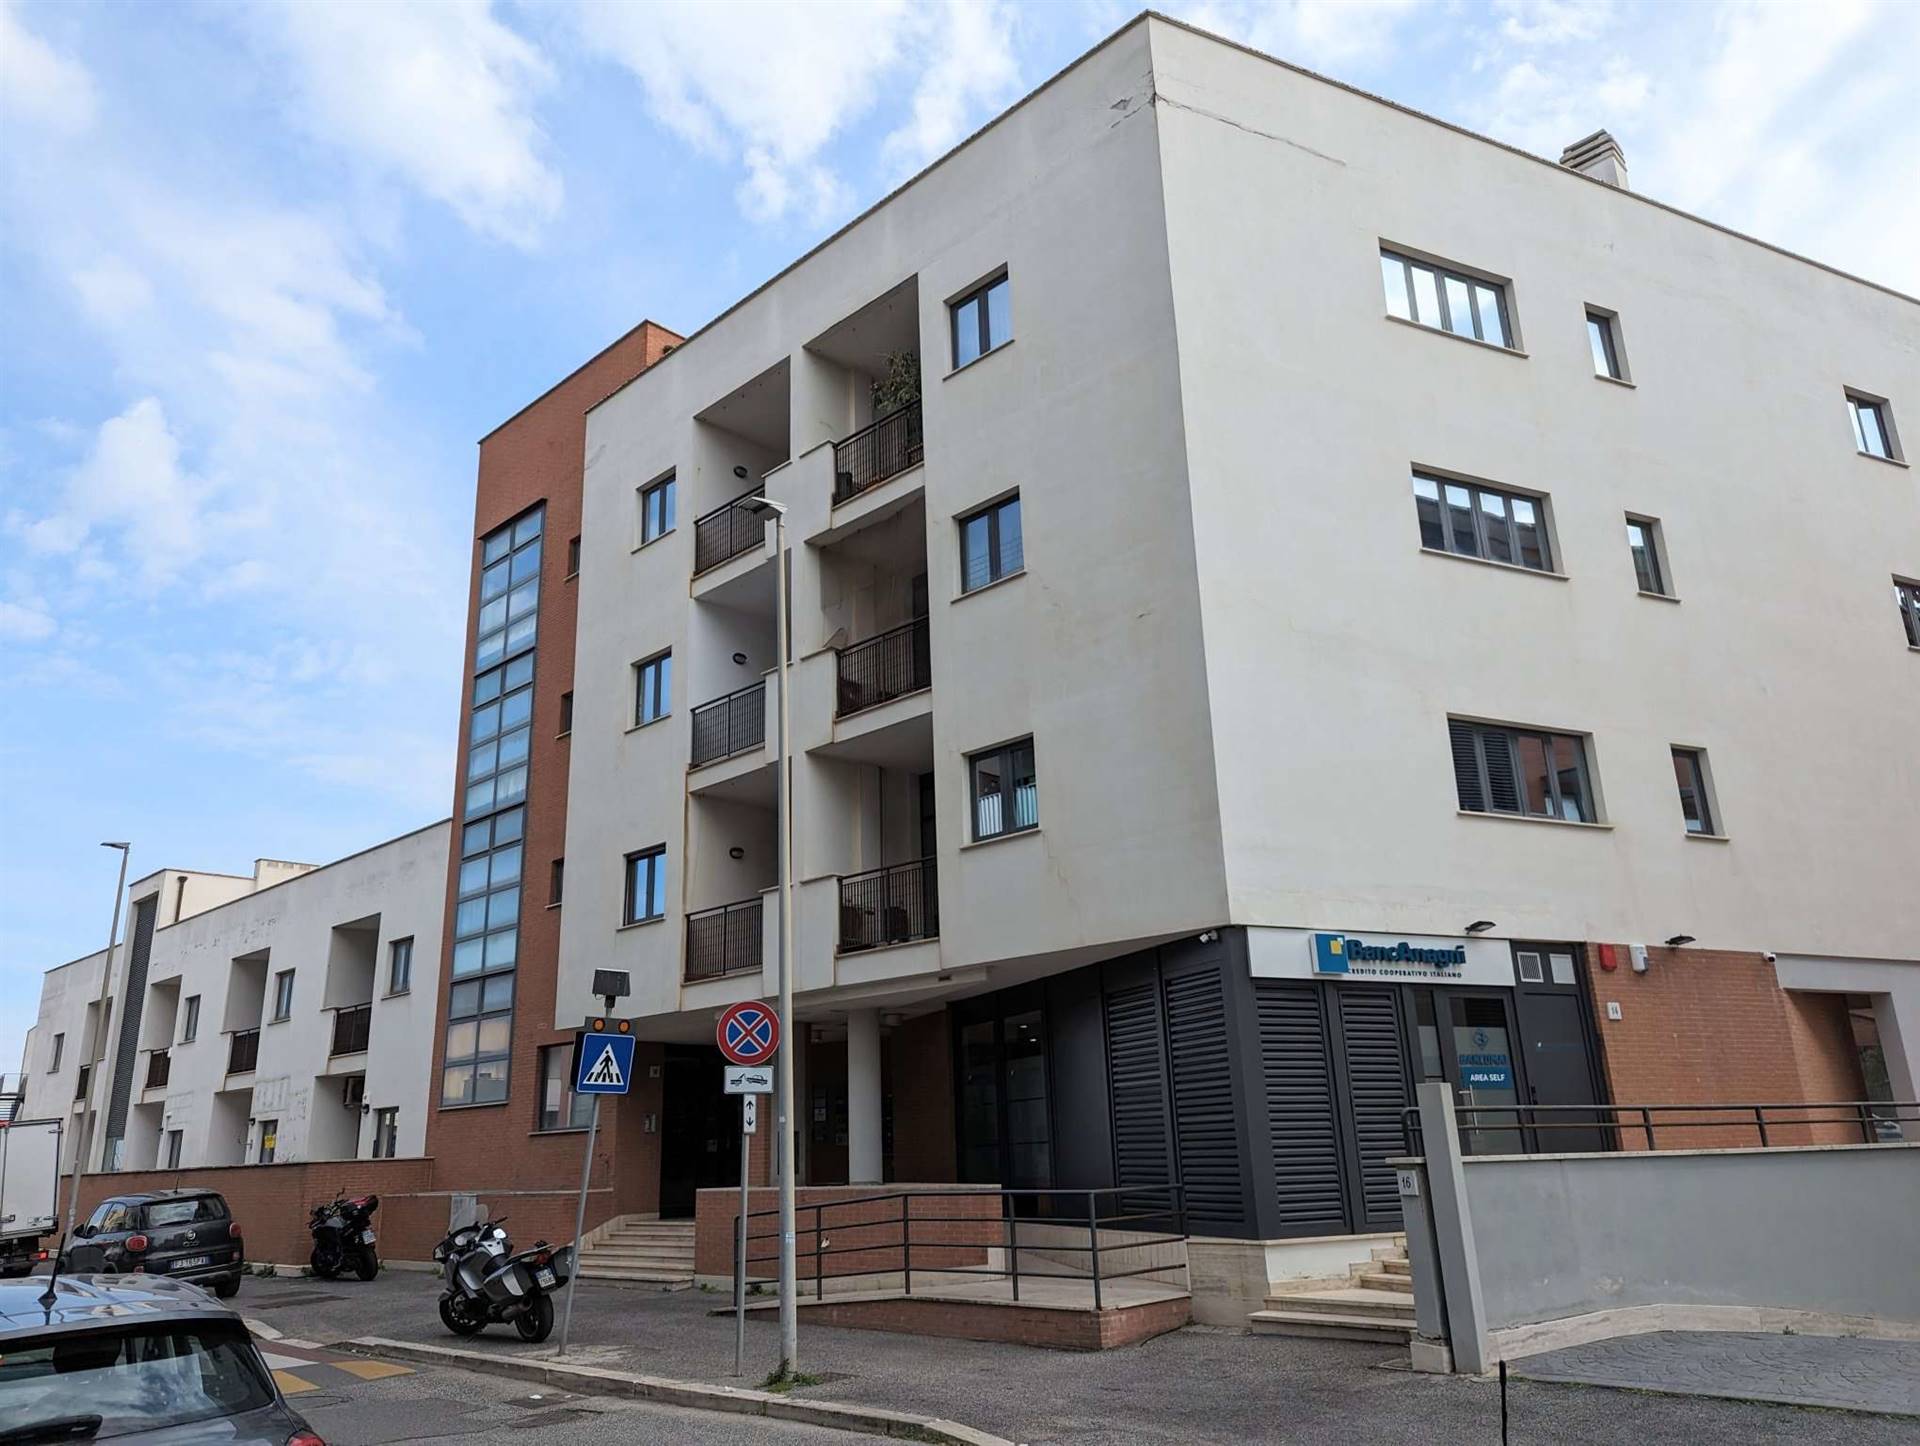 ISOLA SACRA, FIUMICINO, Apartment for rent of 45 Sq. mt., Habitable, Heating Individual heating system, Energetic class: G, placed at Raised on 2, 